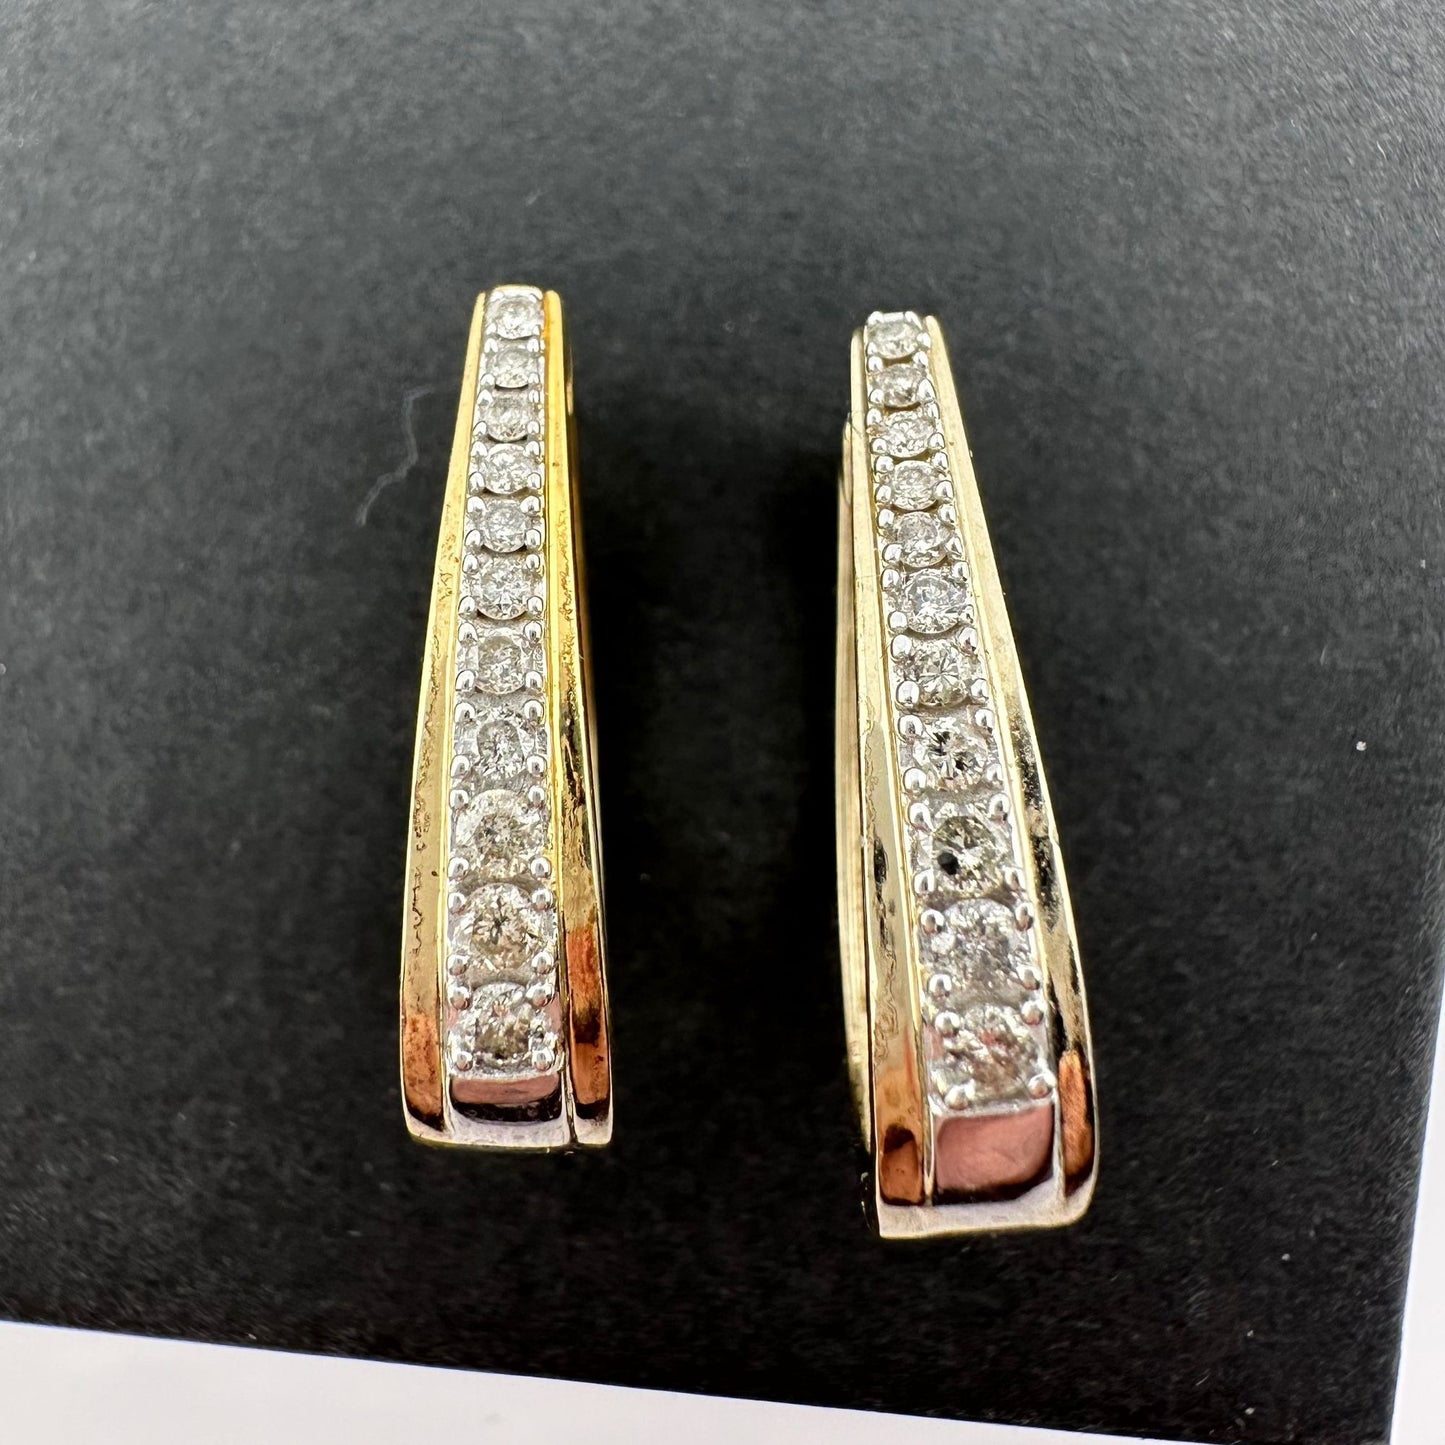 Stunning and Elegant 1/2 ct Diamond Earrings - Sterling Silver with 14kt gold Overlay